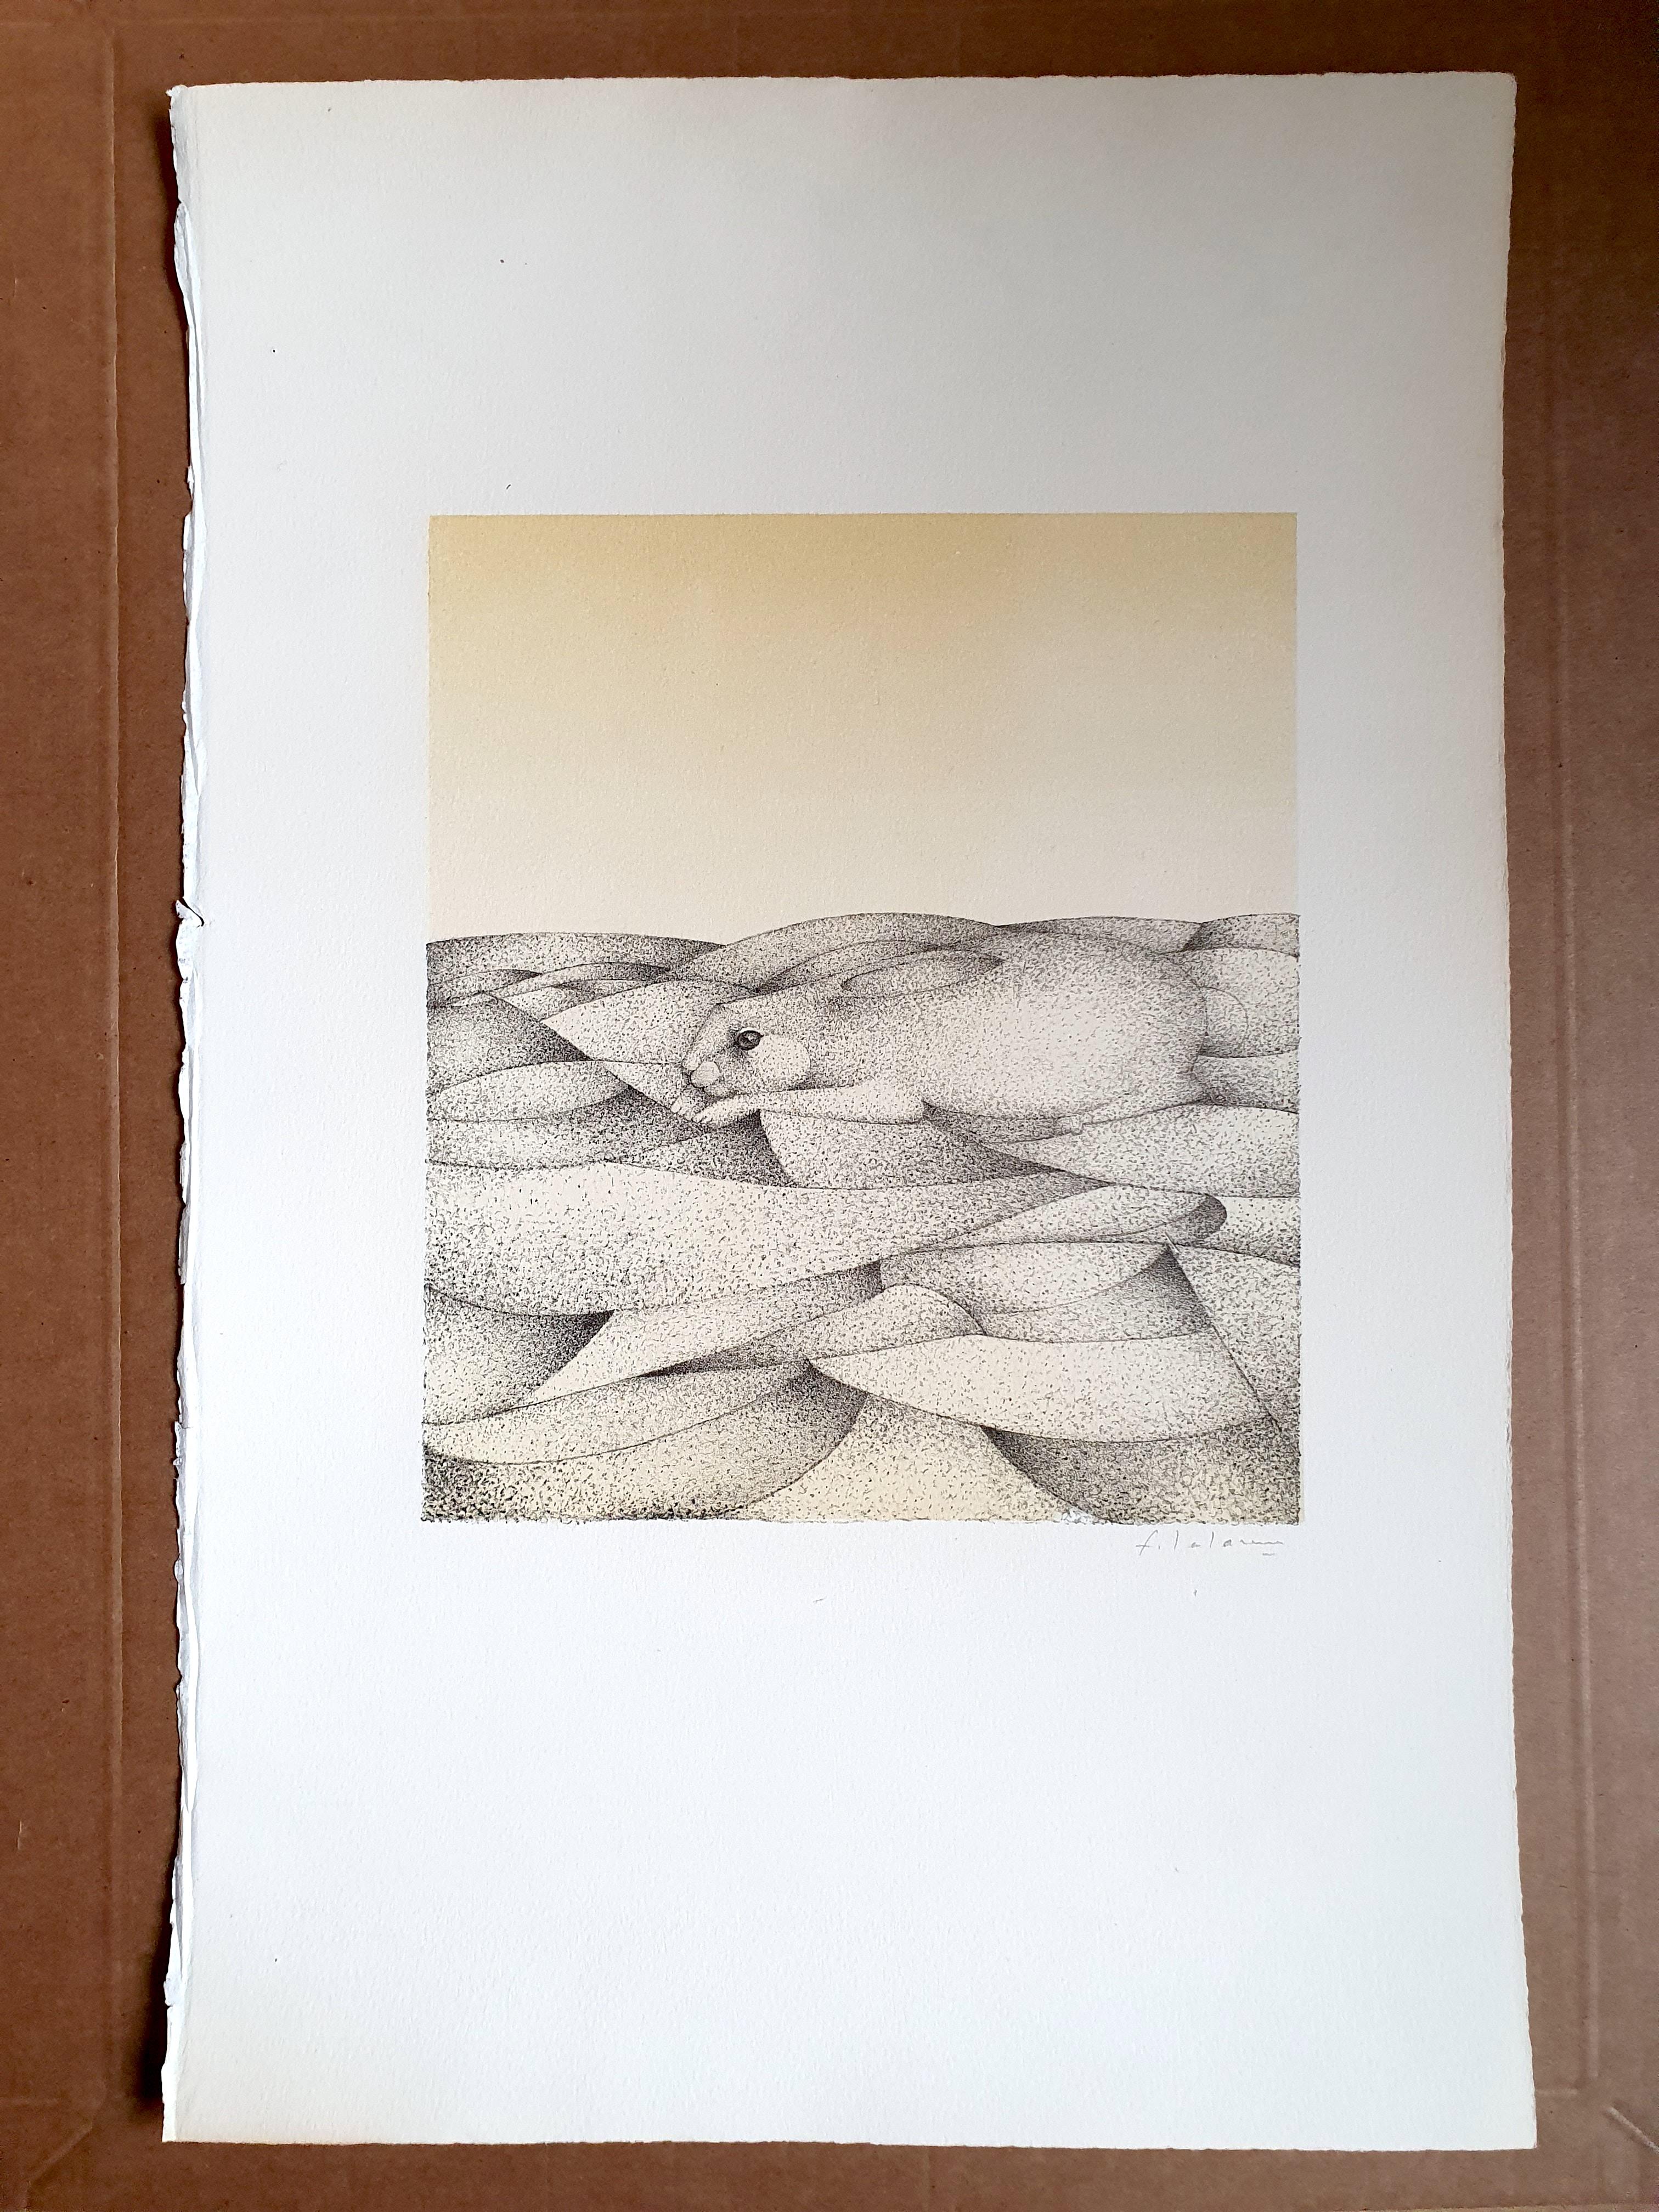 François Xavier Lalanne
The Dilemma ( Hare ) 
1978
Original print 
aquatint and varnish 
signed in pencil 


Limited edition at 75 copies not numbered
Size of the paper : 51 x 33 cm 
Size of the work : 25.3 x 21.7 cm 

Selling price : 2500 euros 